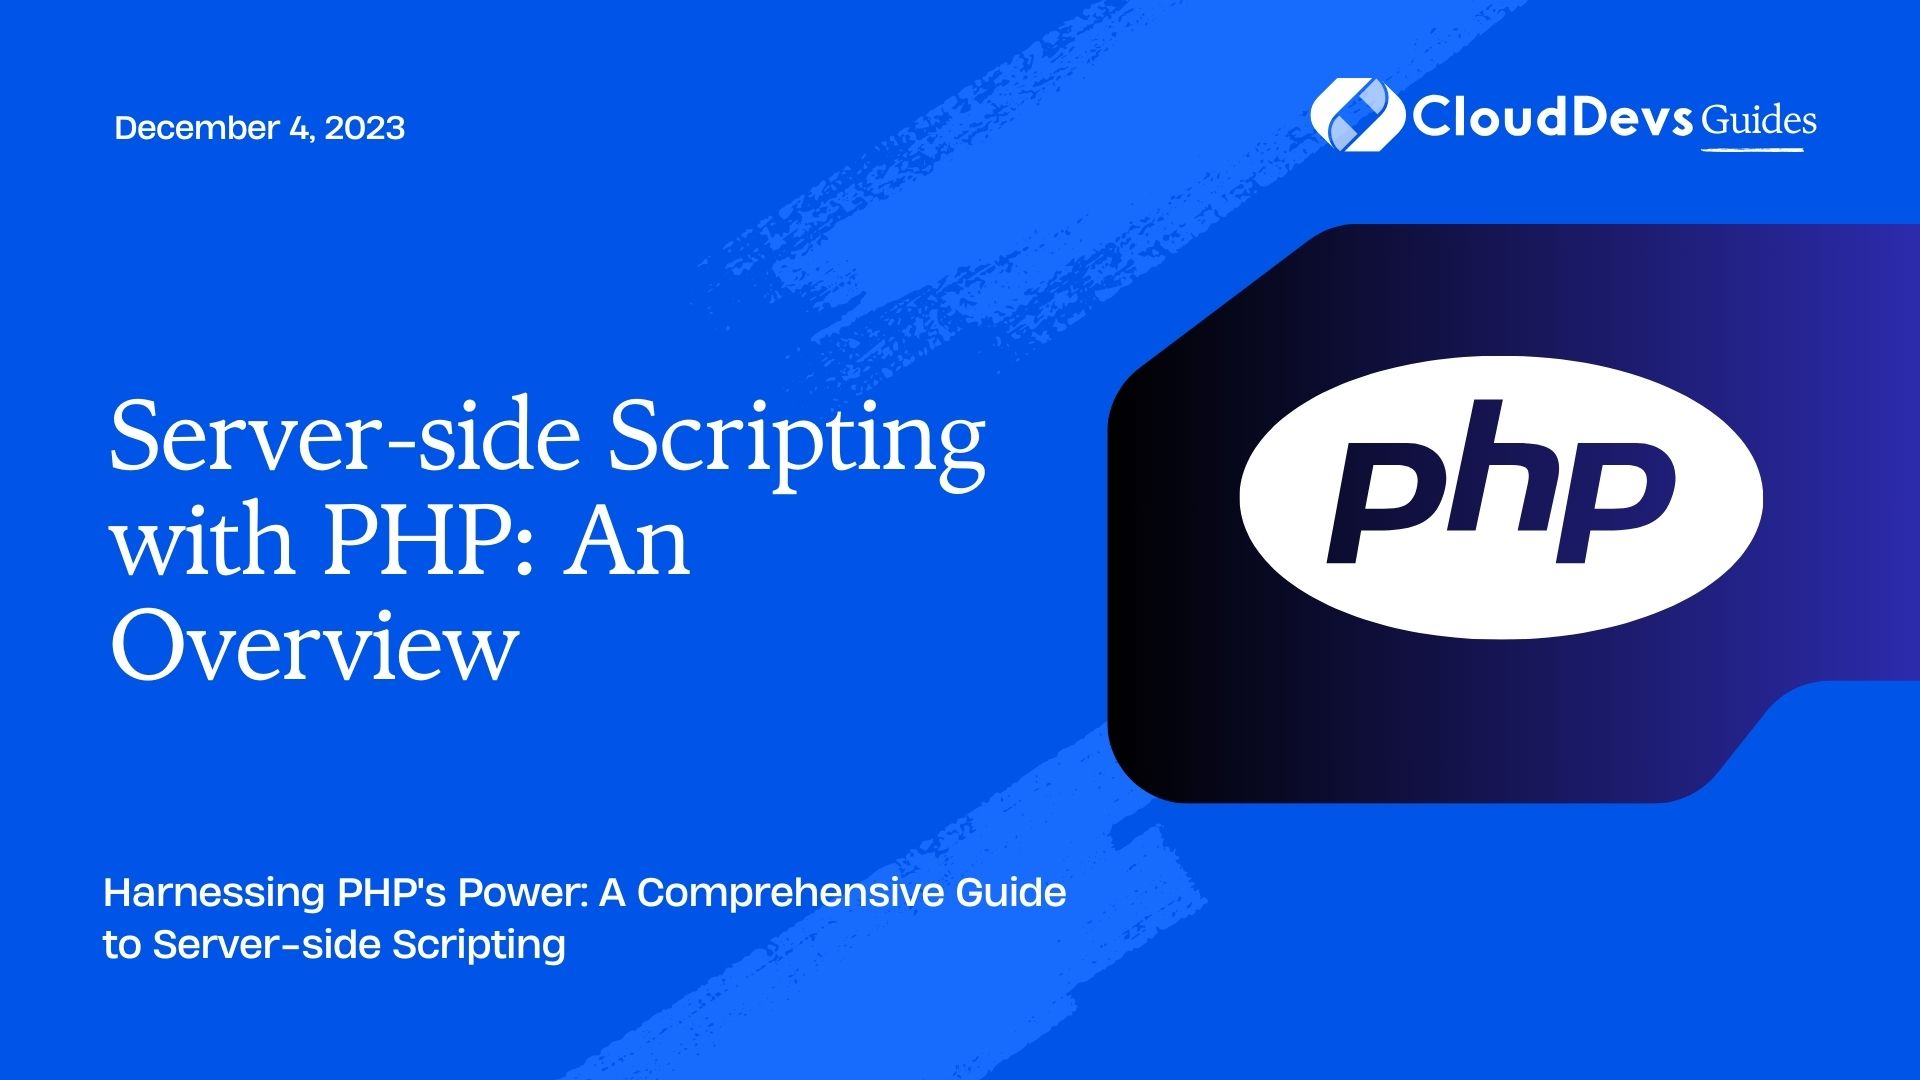 Server-side Scripting with PHP: An Overview